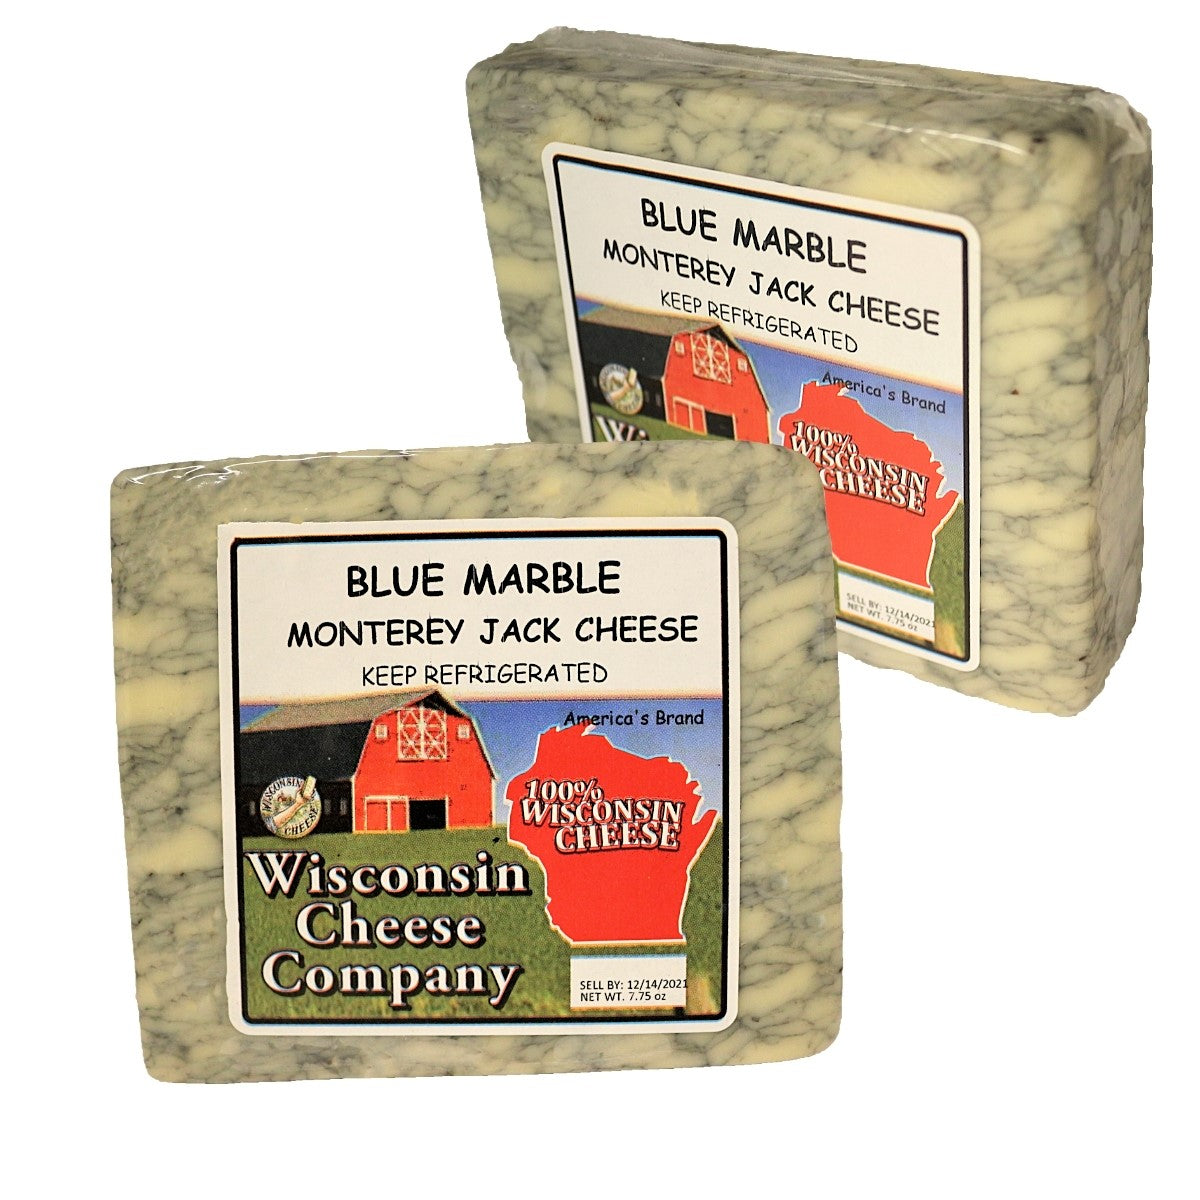 Two blocks of Blue Marble Monterey Jack Cheese